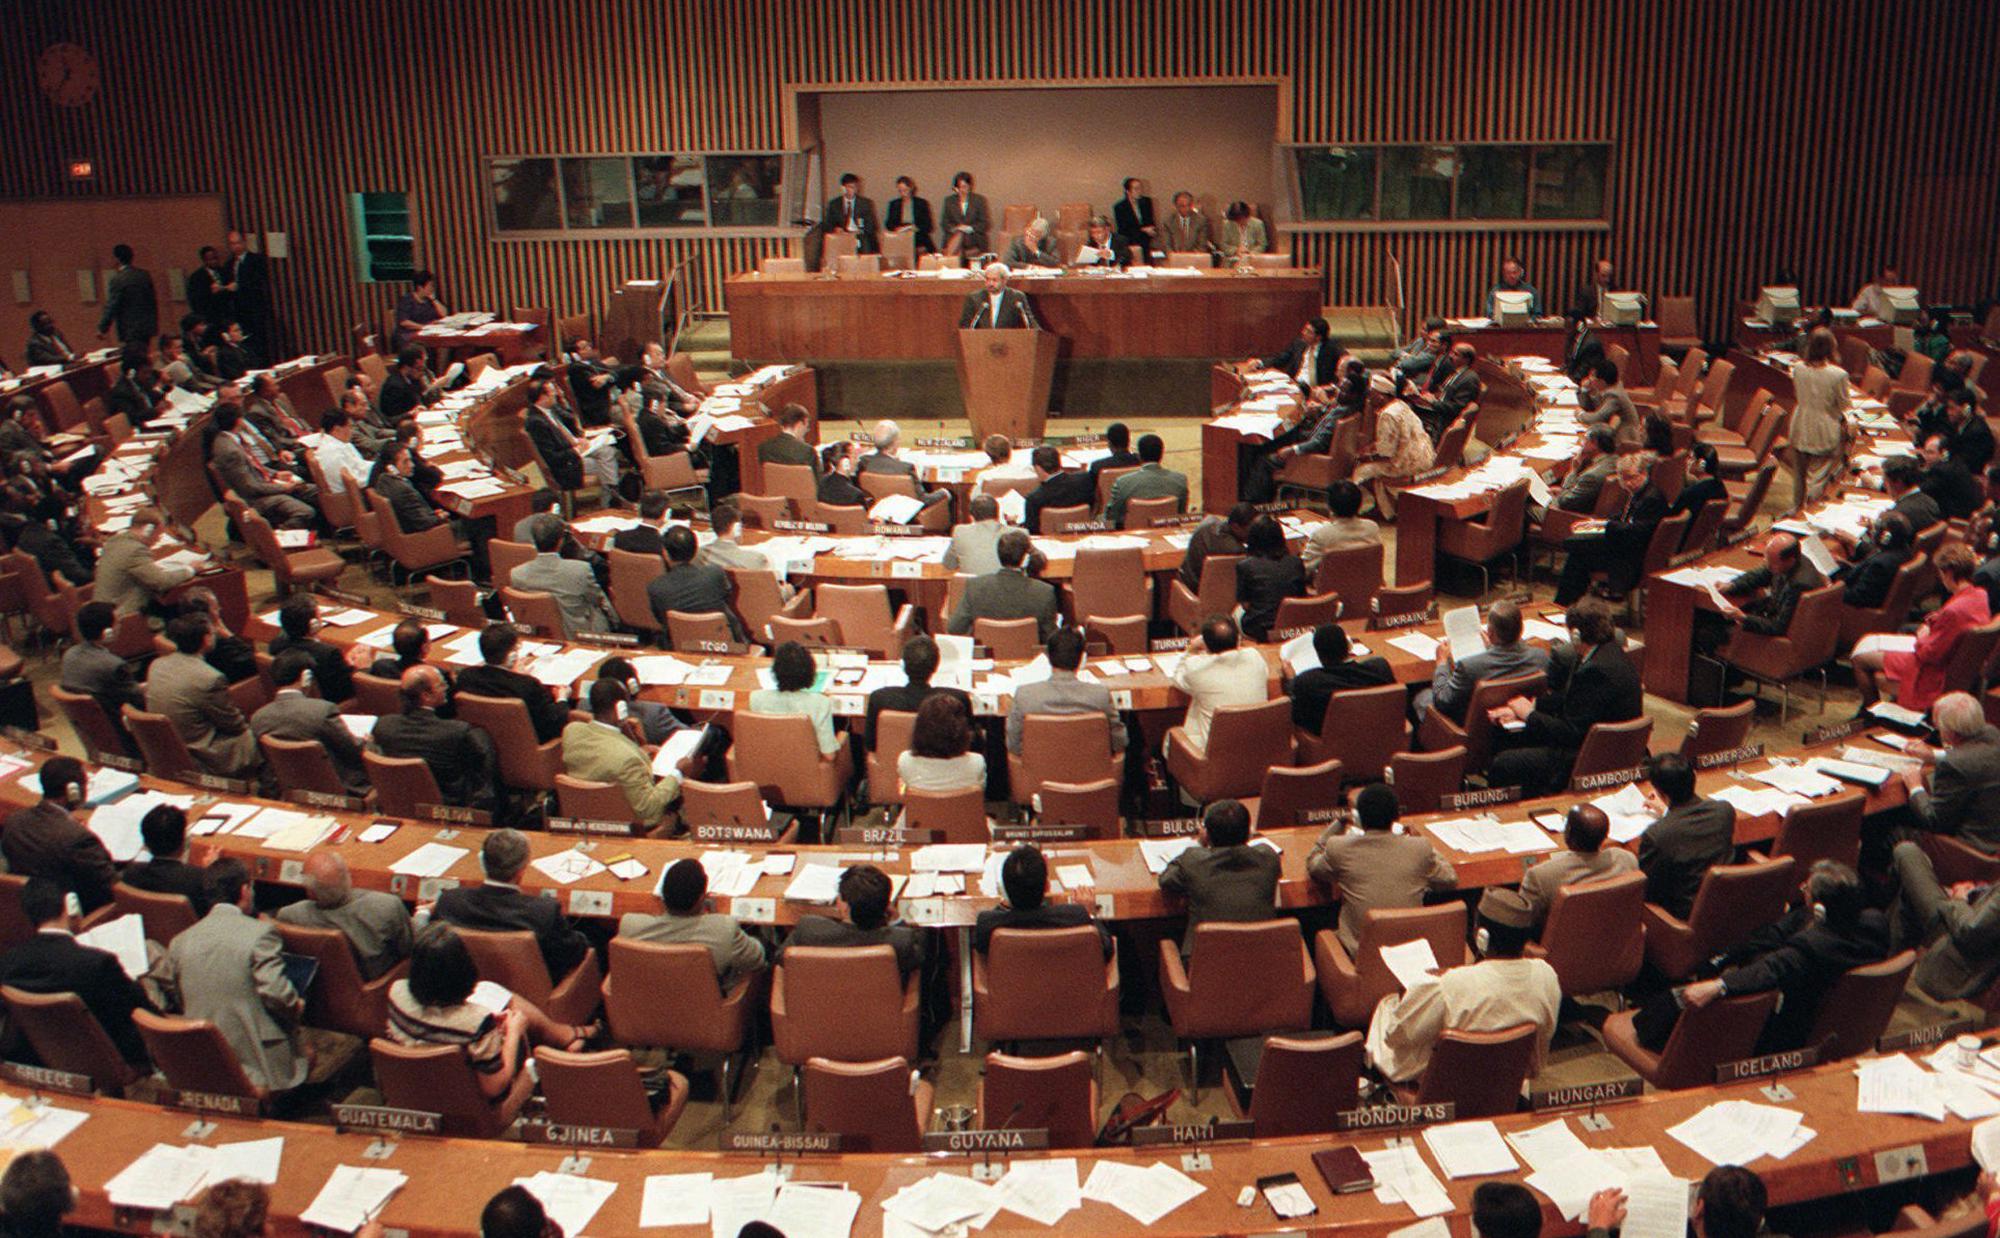 Participants of the Nuclear Weapons Conference did not agree on the final document